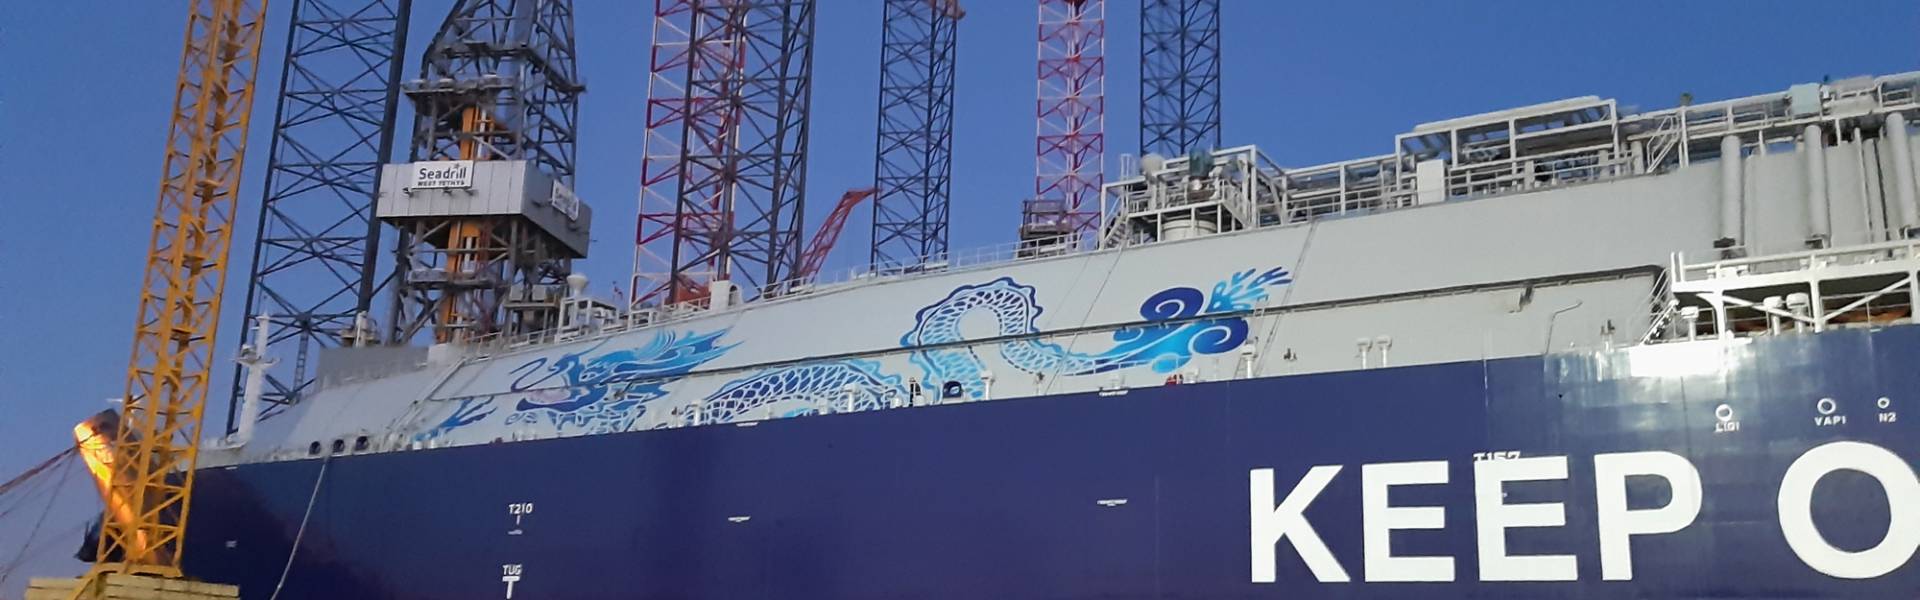 Large format print in every tint | X-Treme Creations An immense vinyl sticker in the shape of dragon of 60 meters long placed on each side of the VLEC Marlin ship's bow Evergas X-Treme Creations